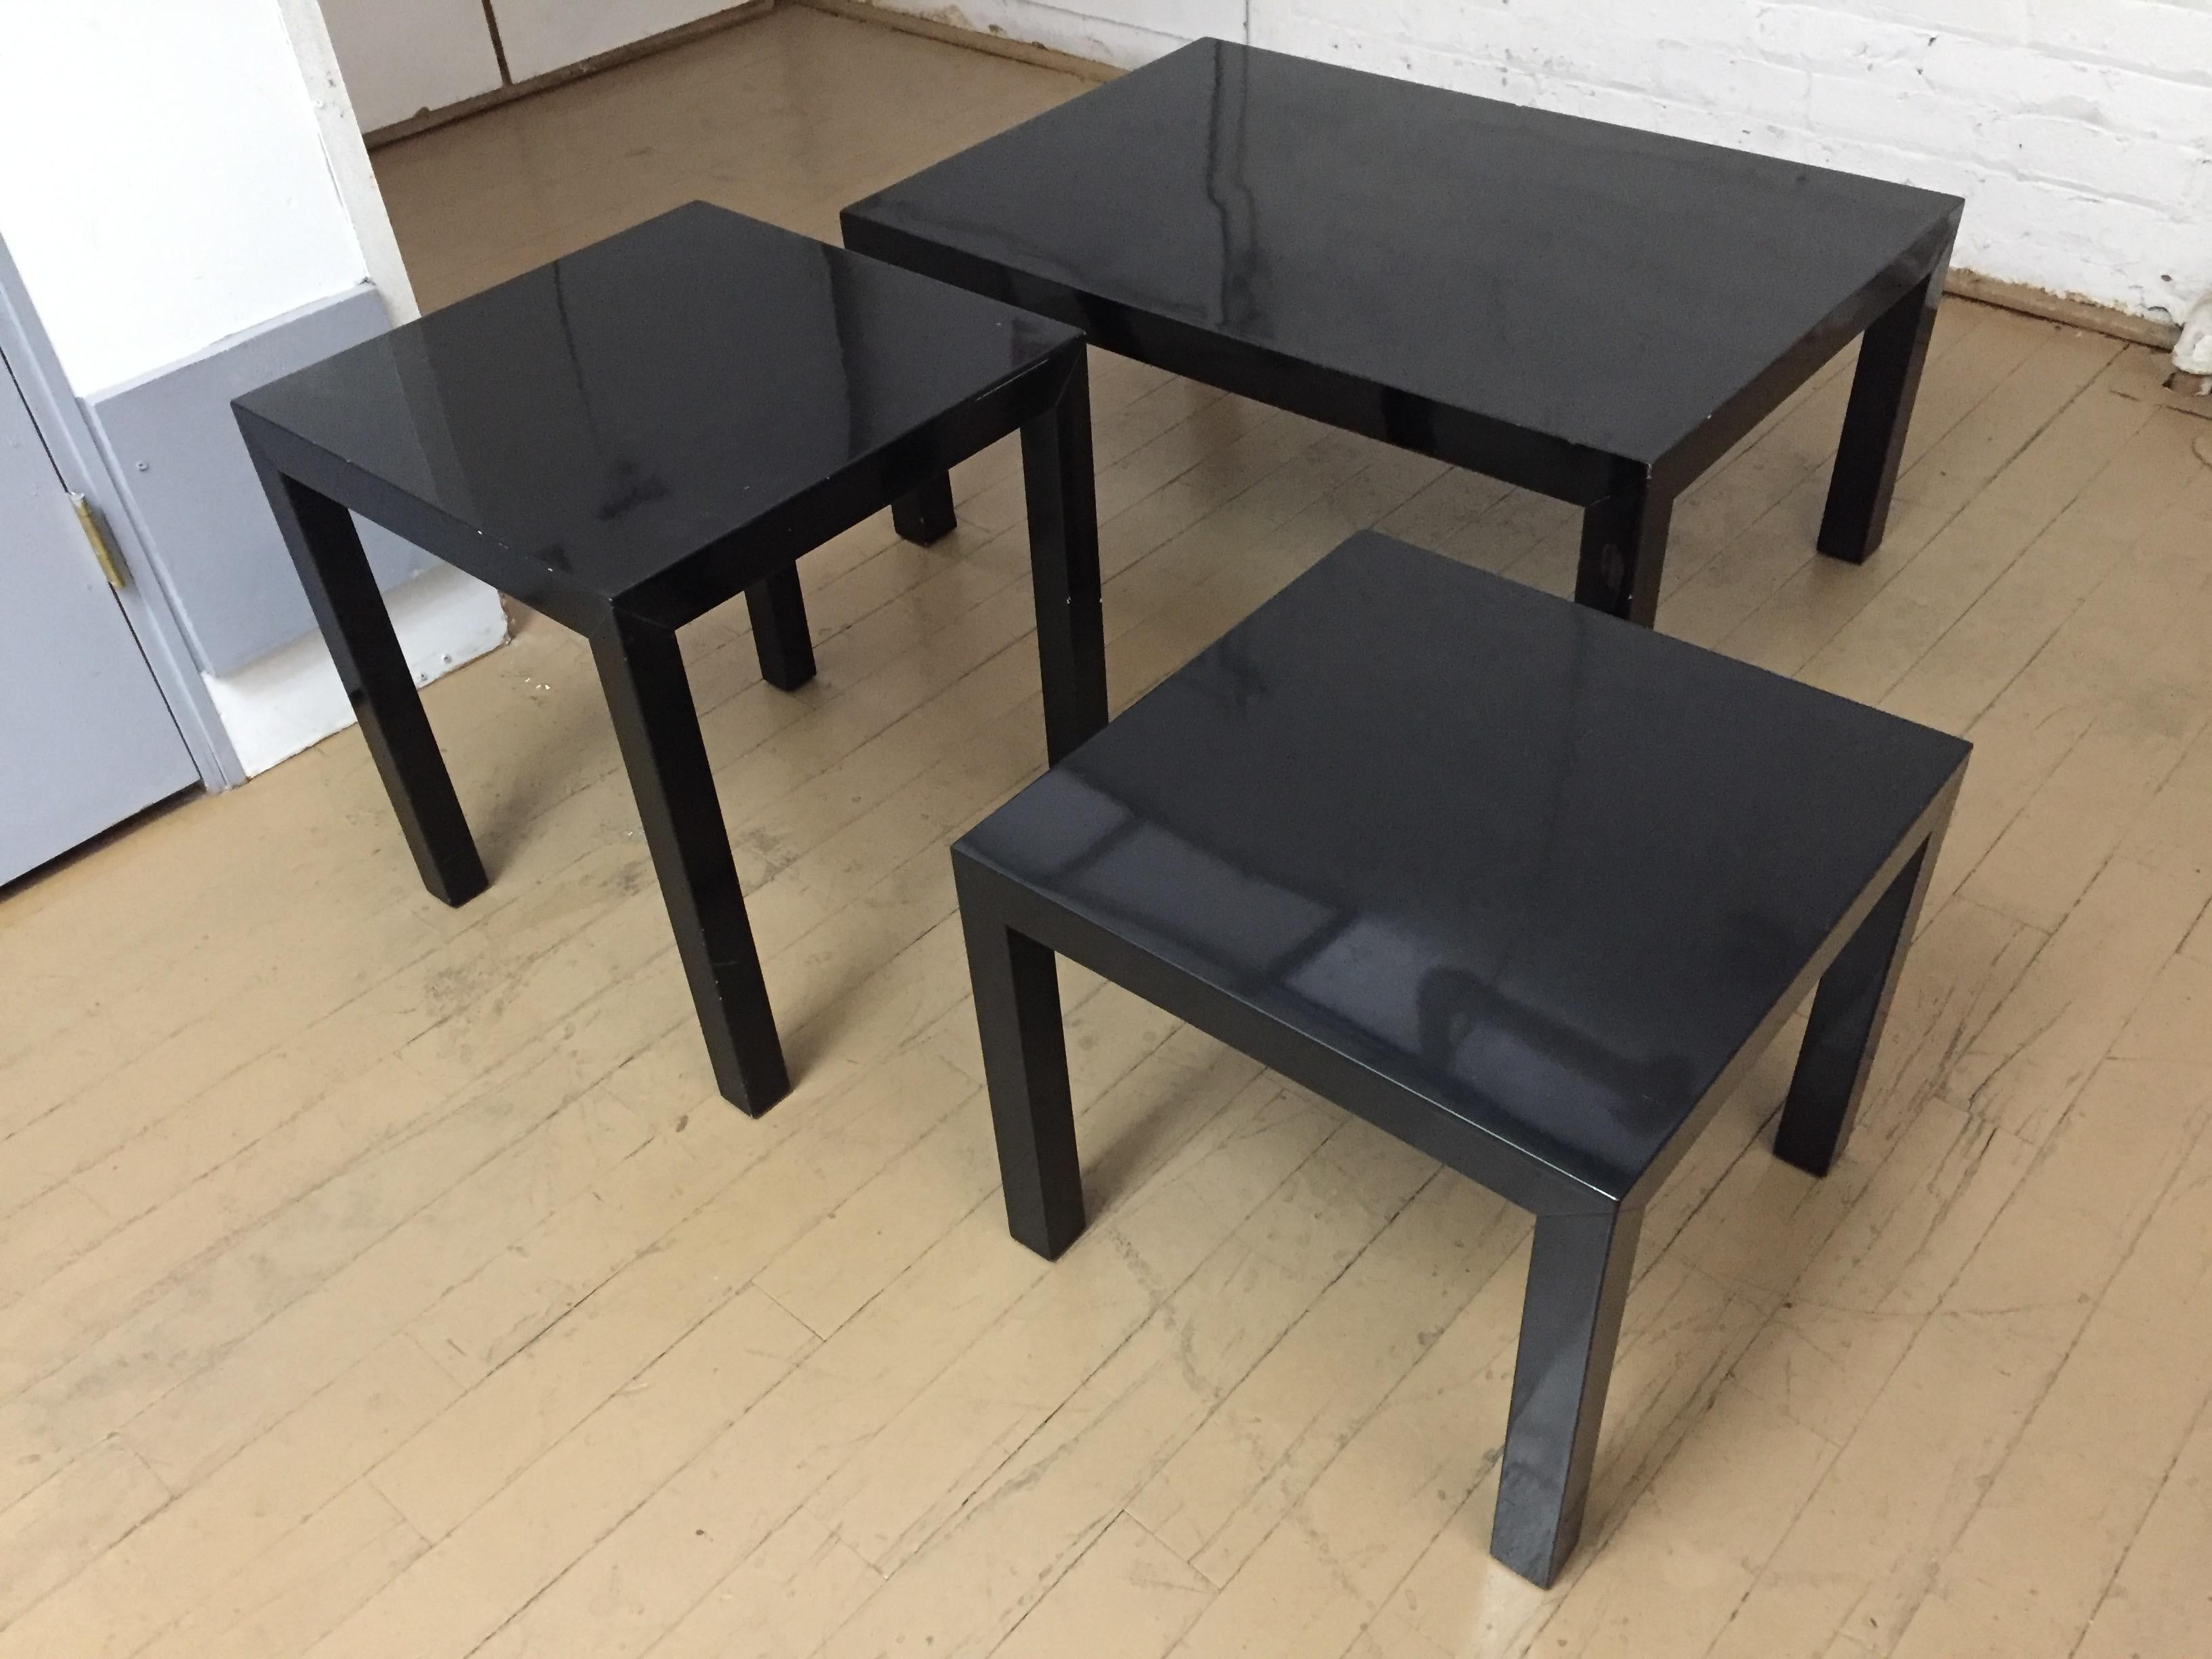 American Mid-century Modern  Black Lacquer Tables / Set of Three For Sale